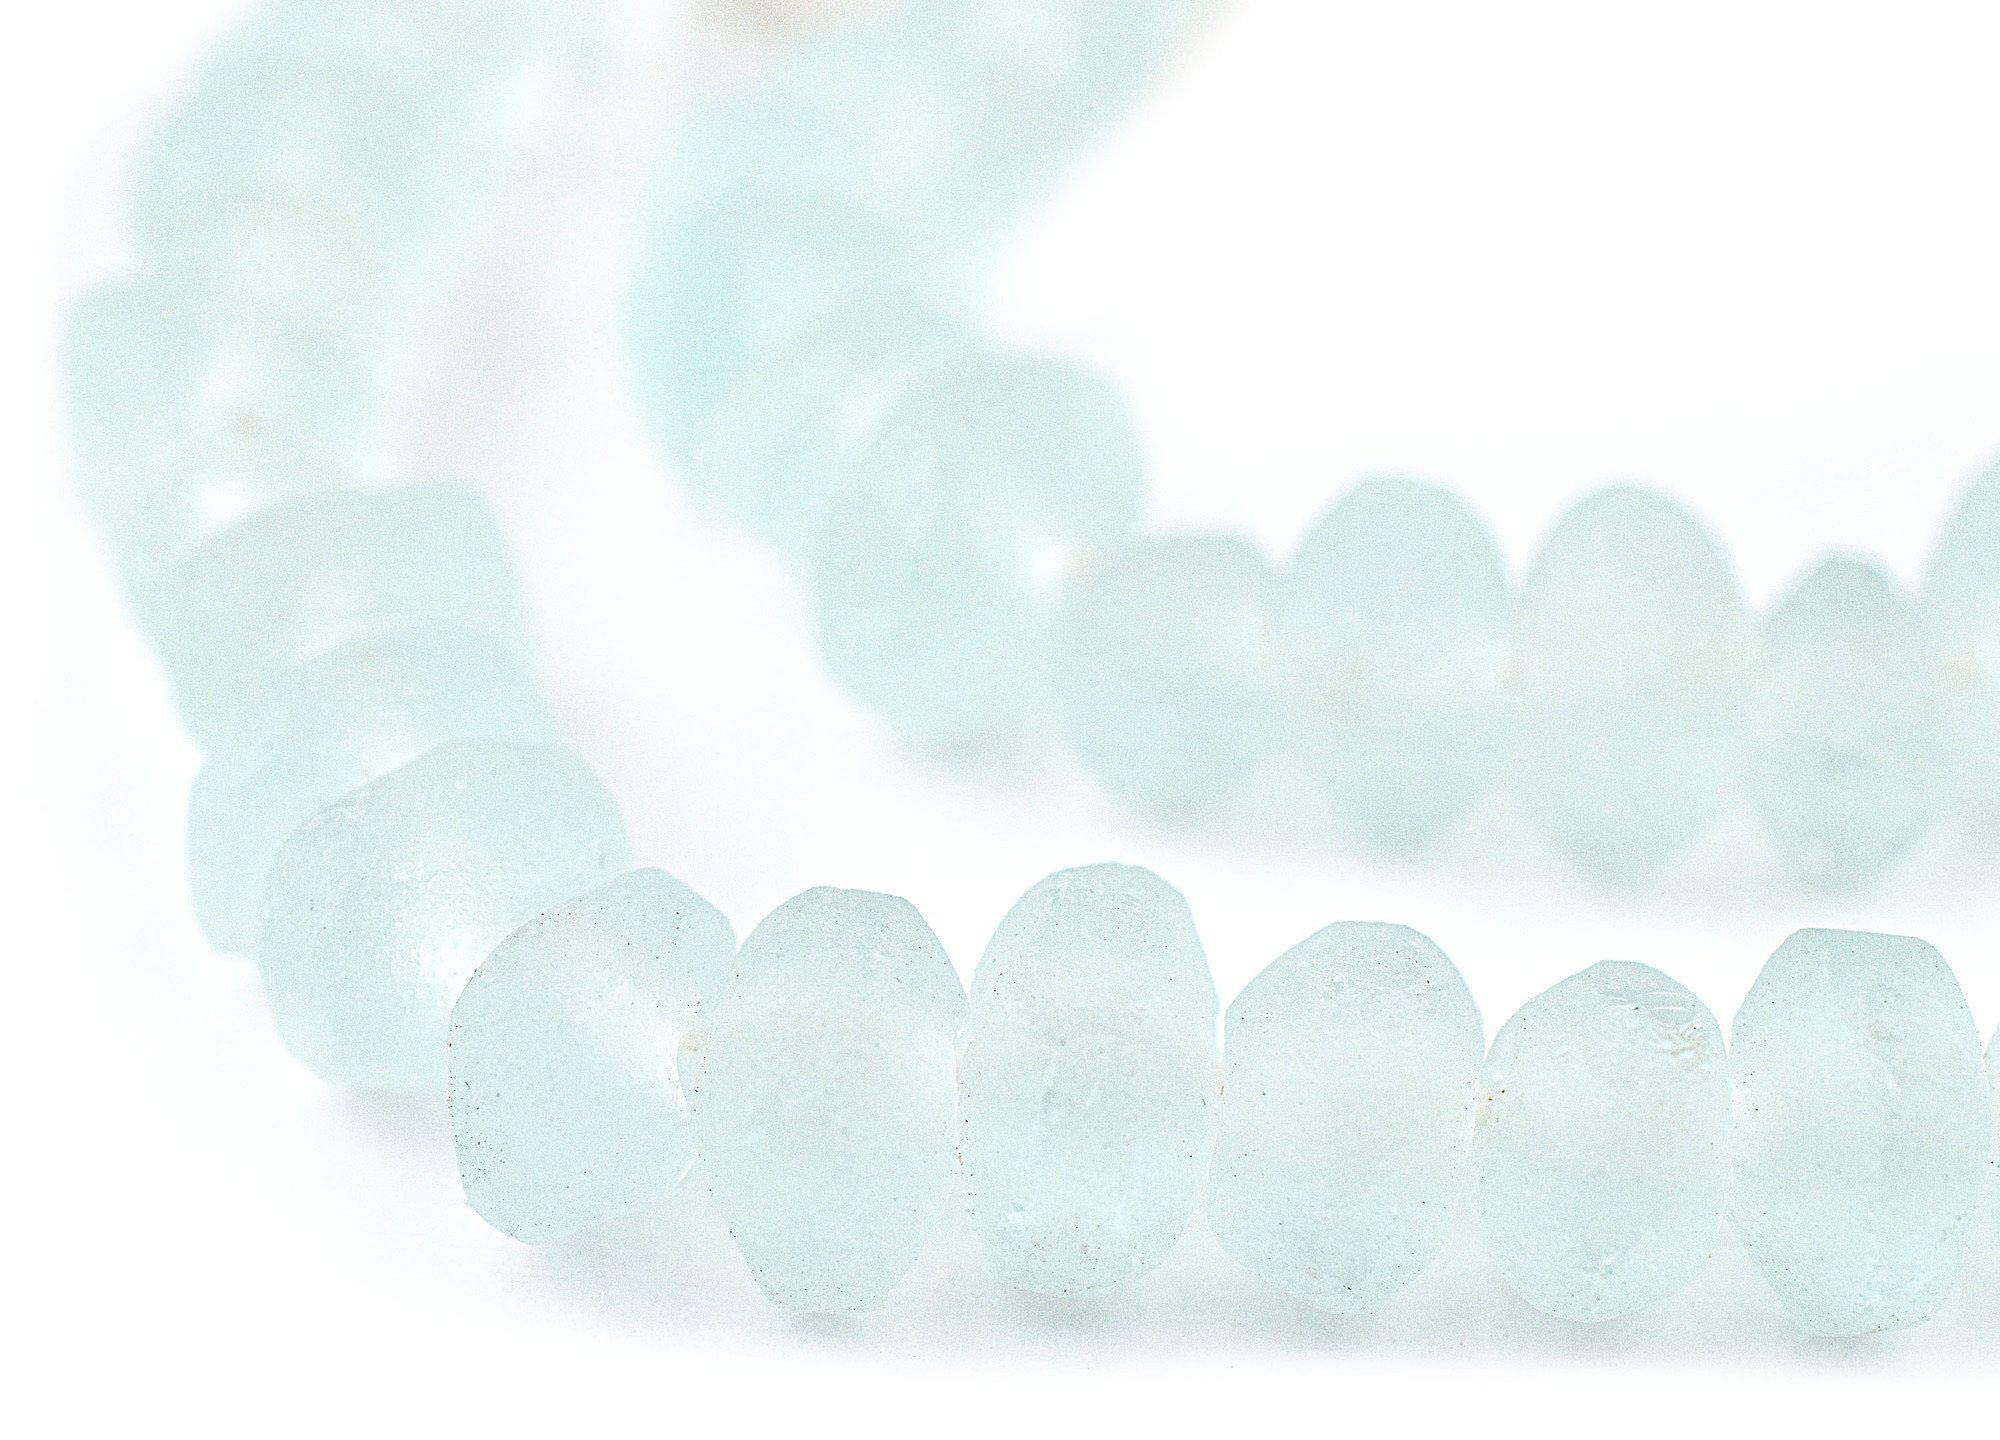 TheBeadChest Clear Aqua Rondelle Java Recycled Glass Beads (6x10mm)